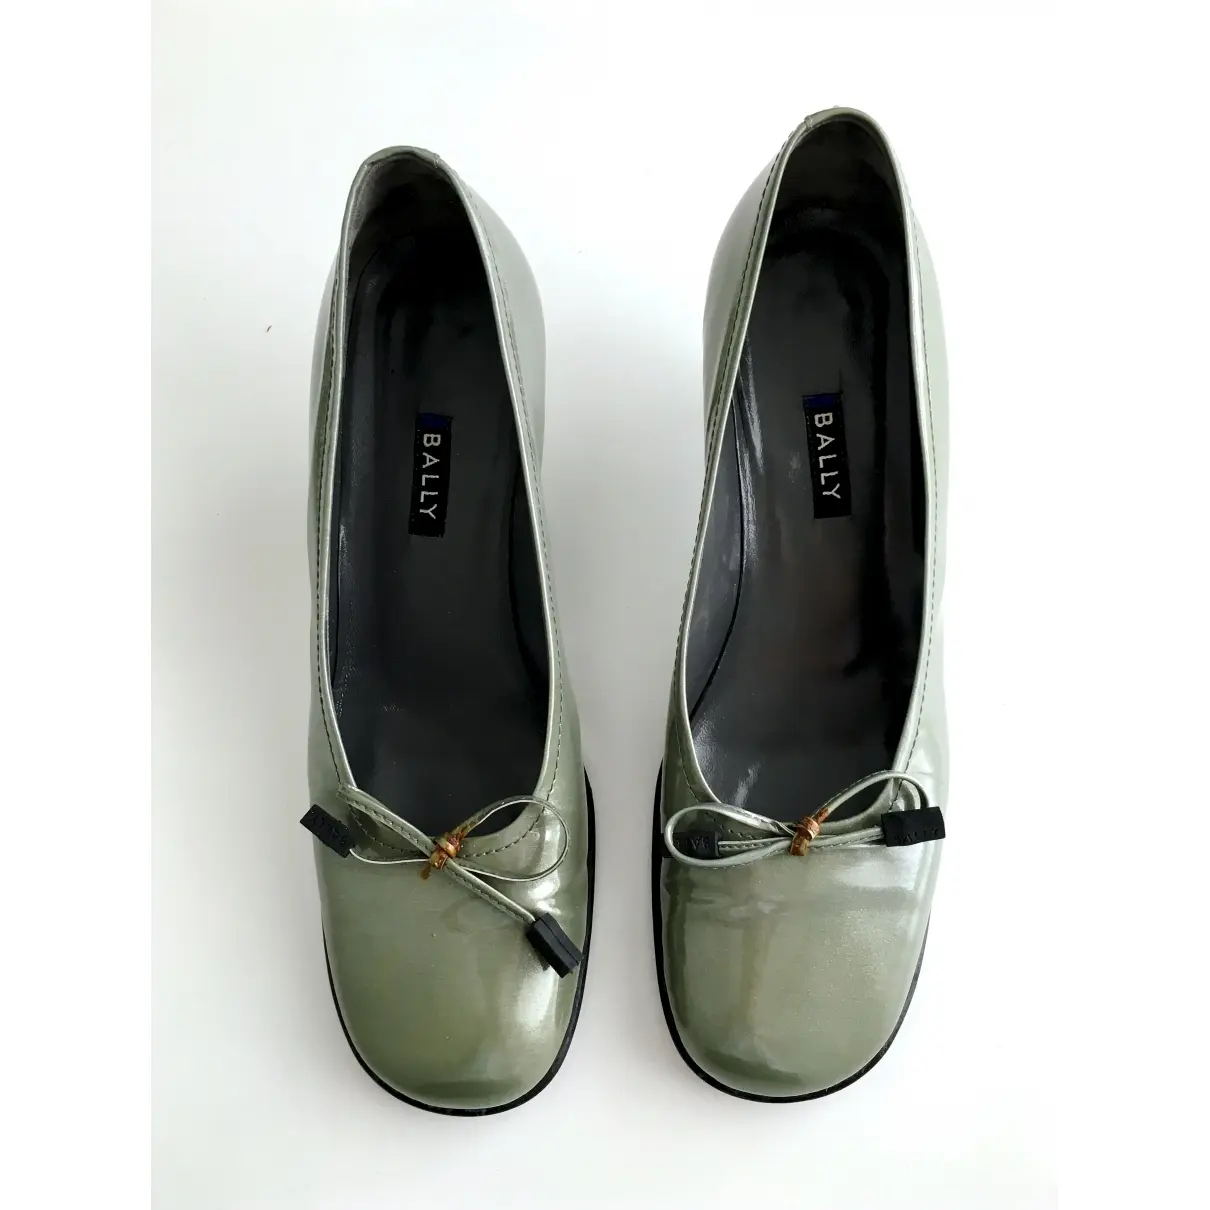 Bally Patent leather heels for sale - Vintage